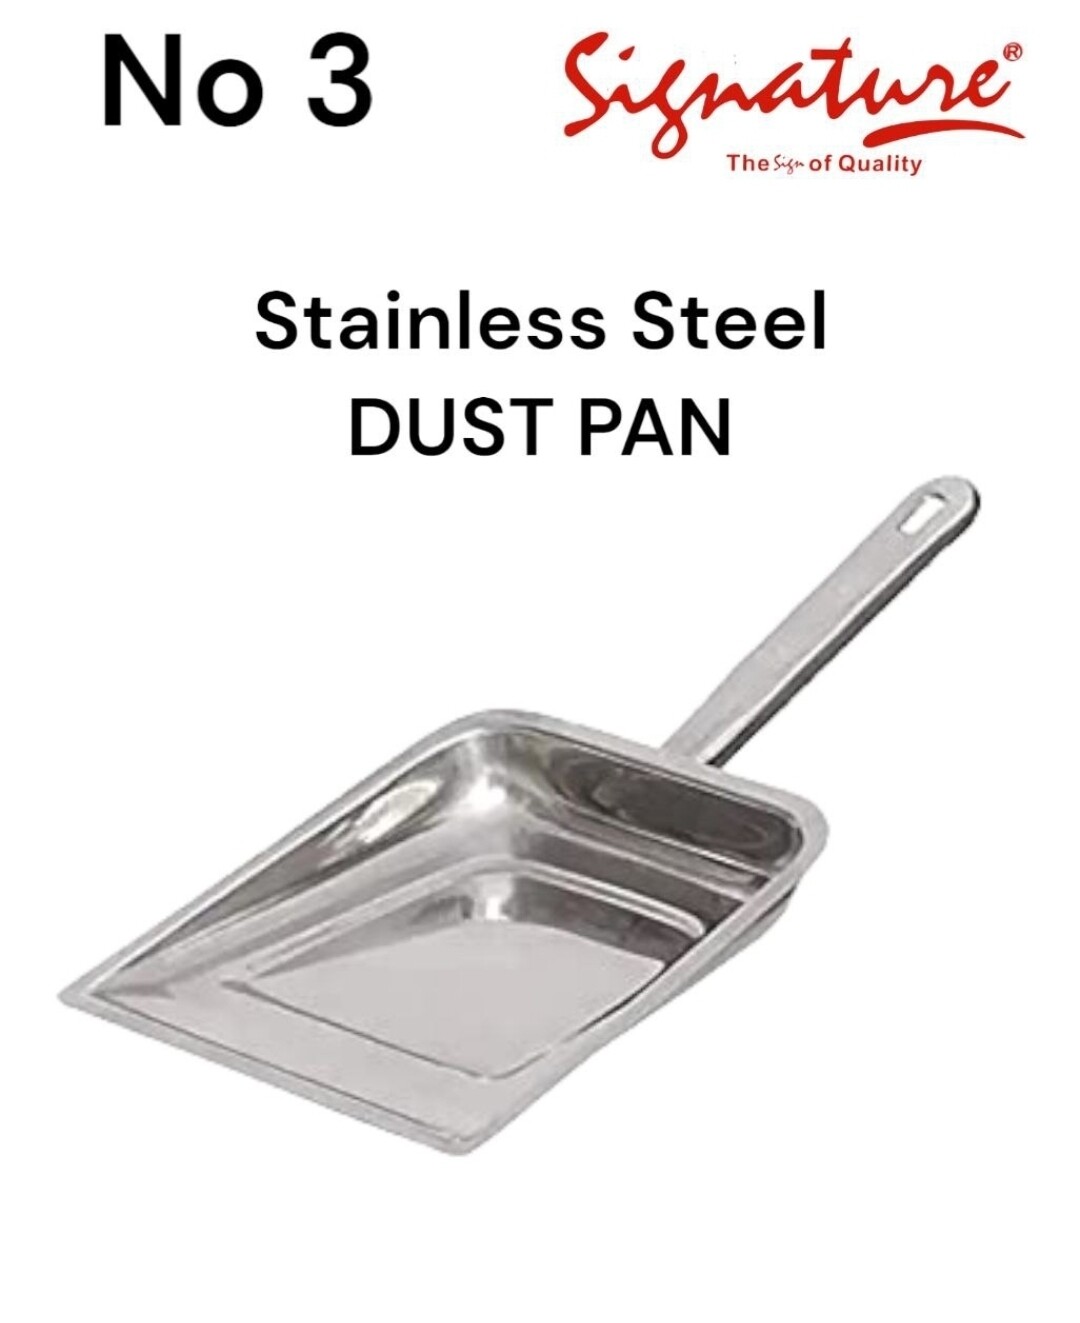 Signature stainless steel dust pan no 3